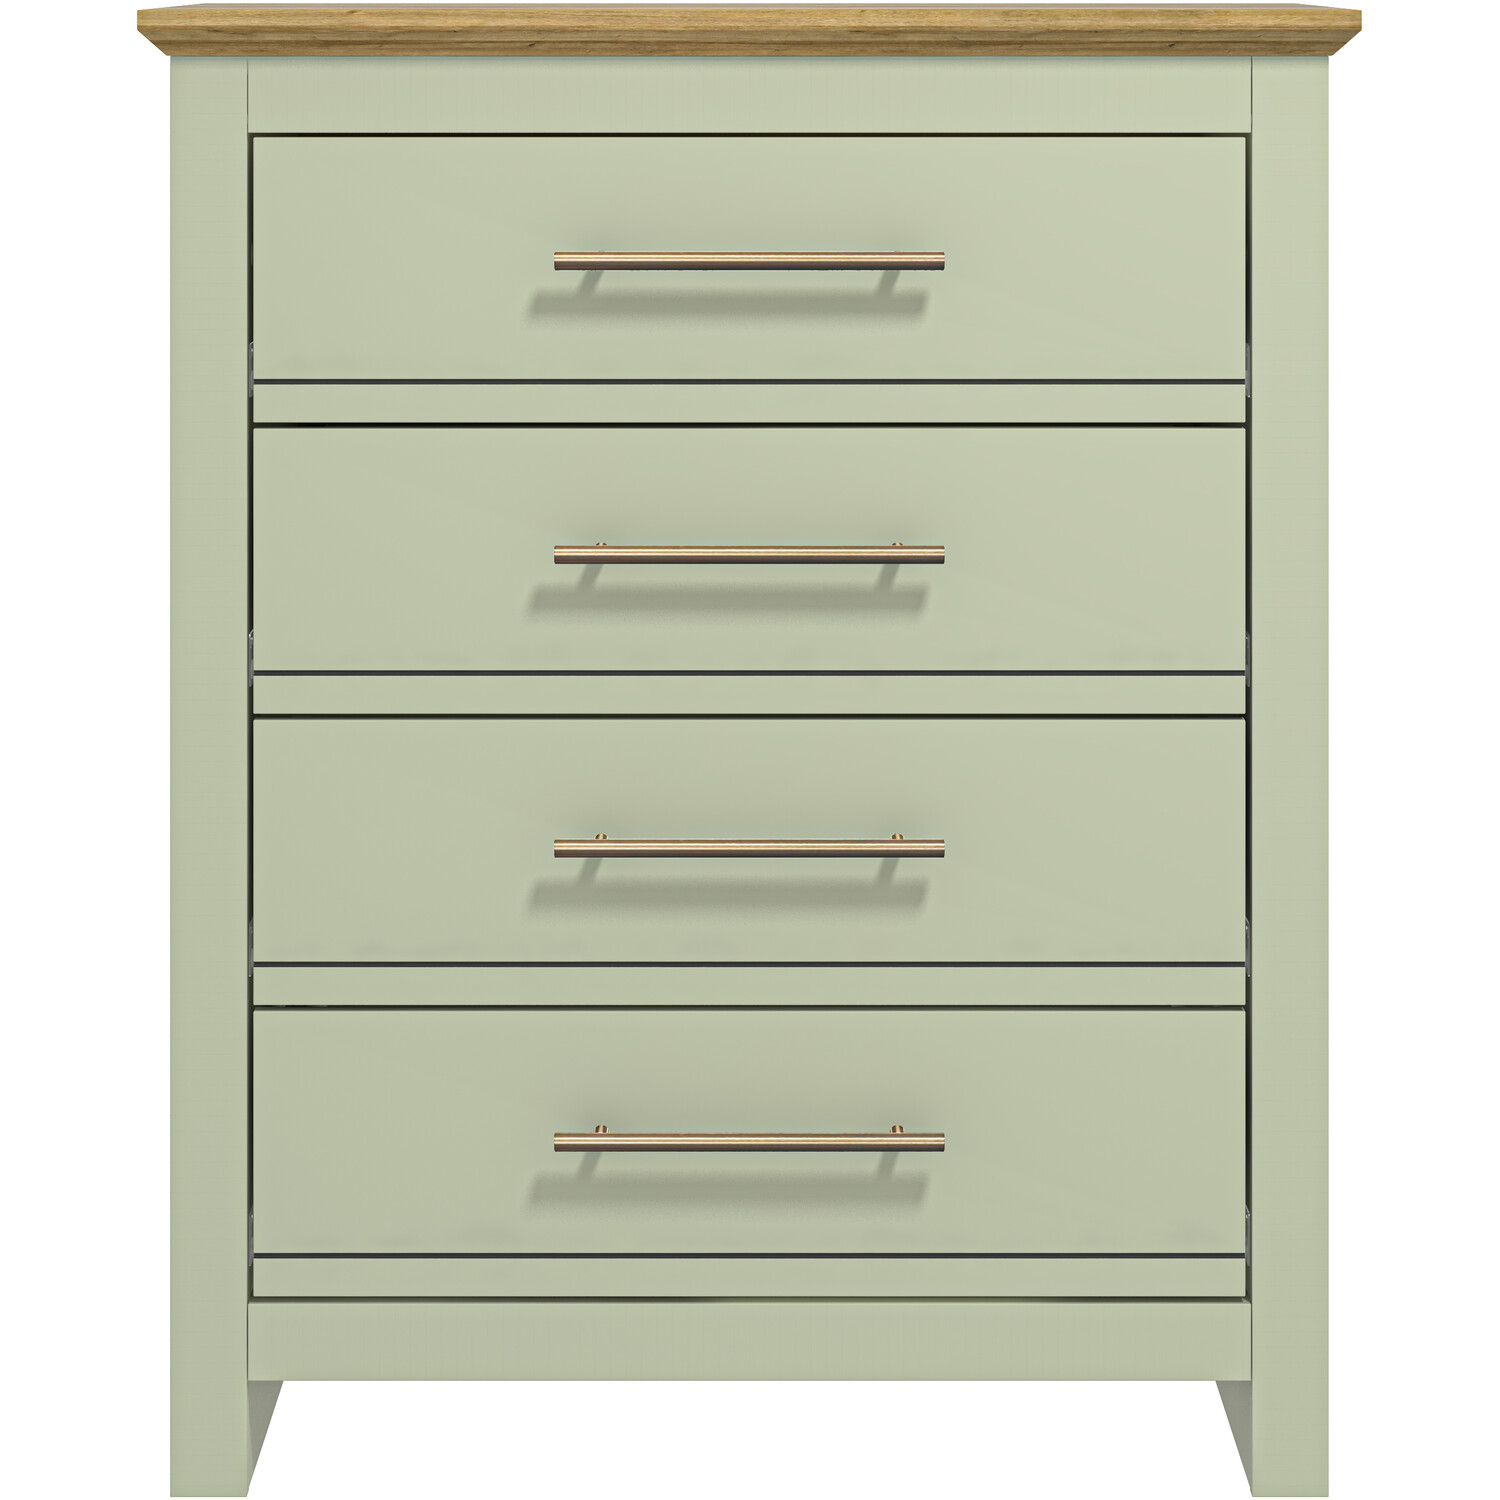 Bexley 4 Drawer Sage Green Chest of Drawers Image 2